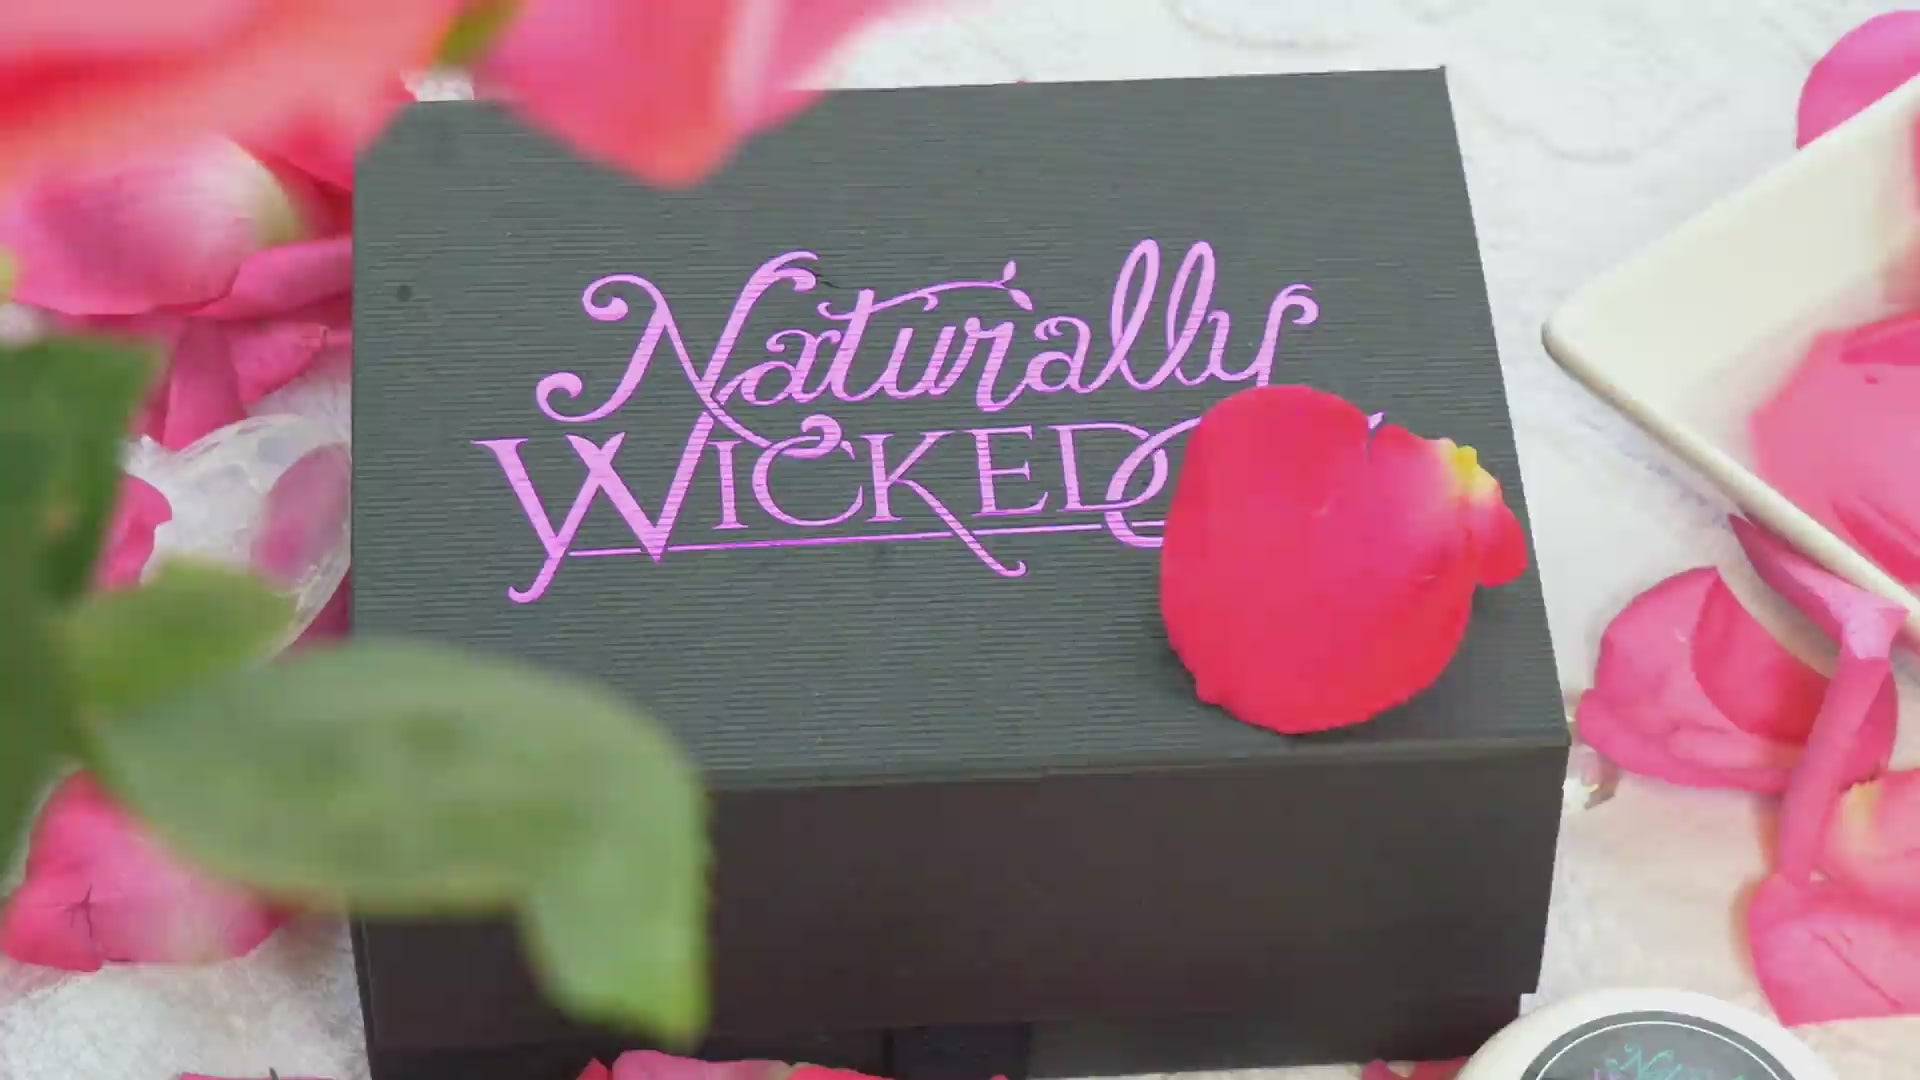 Naturally Wicked Woman Utilising The Original Hand & Foot Beauty Kit To Scrub, Moisturise & Perfect Hand & Foot Skin As Part Of Skincare Regime